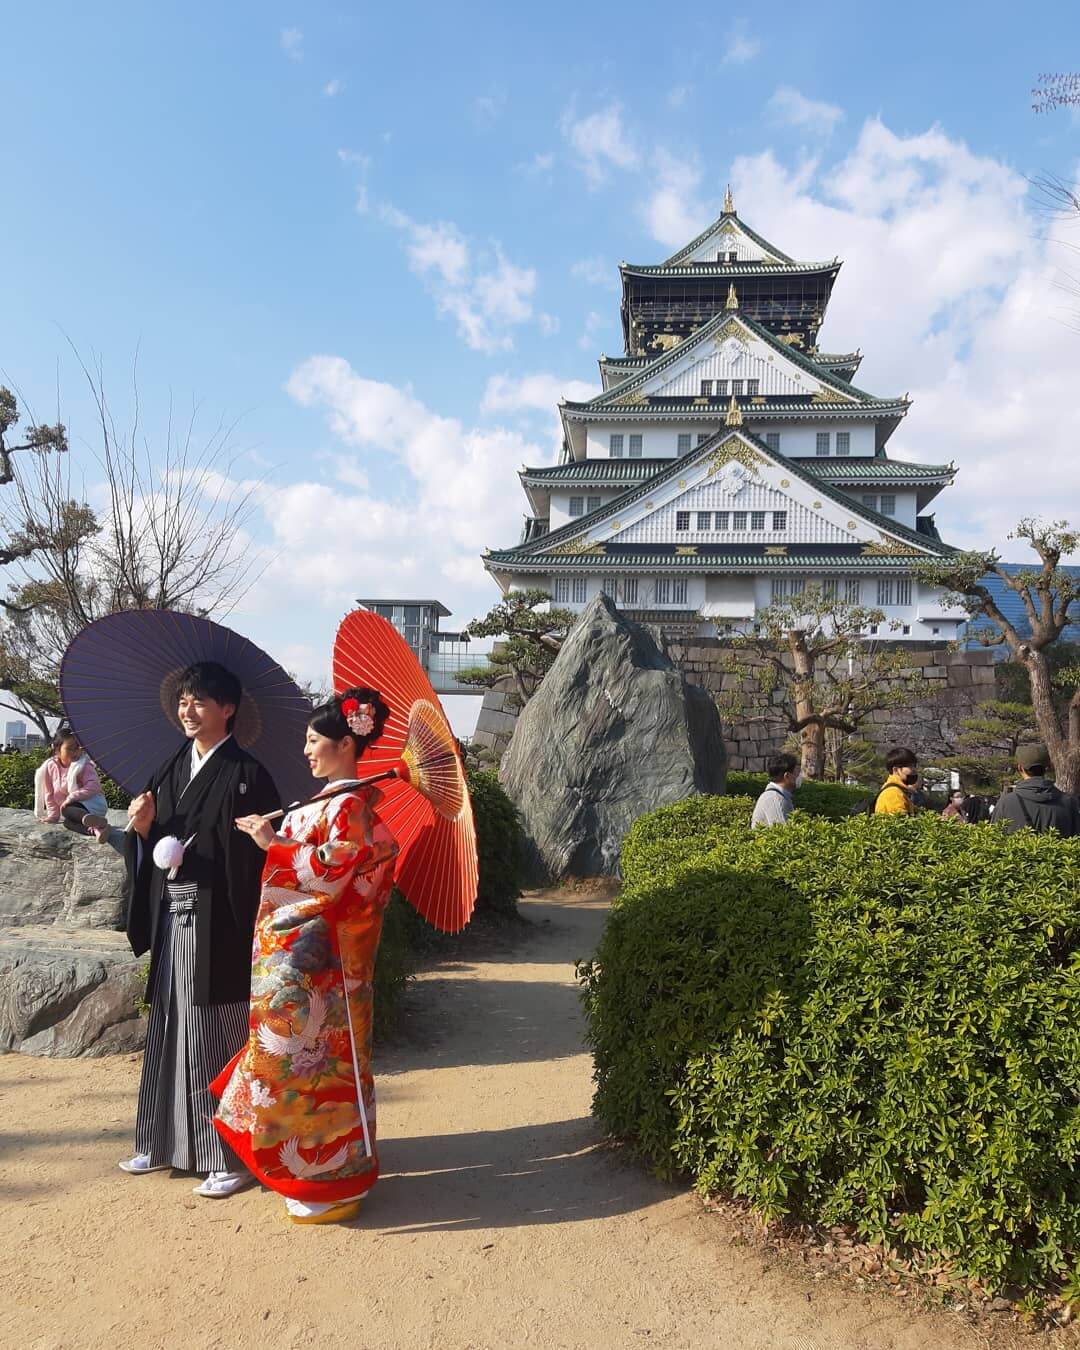 Osaka Castle is a top cherry blossom spot during spring in Japan